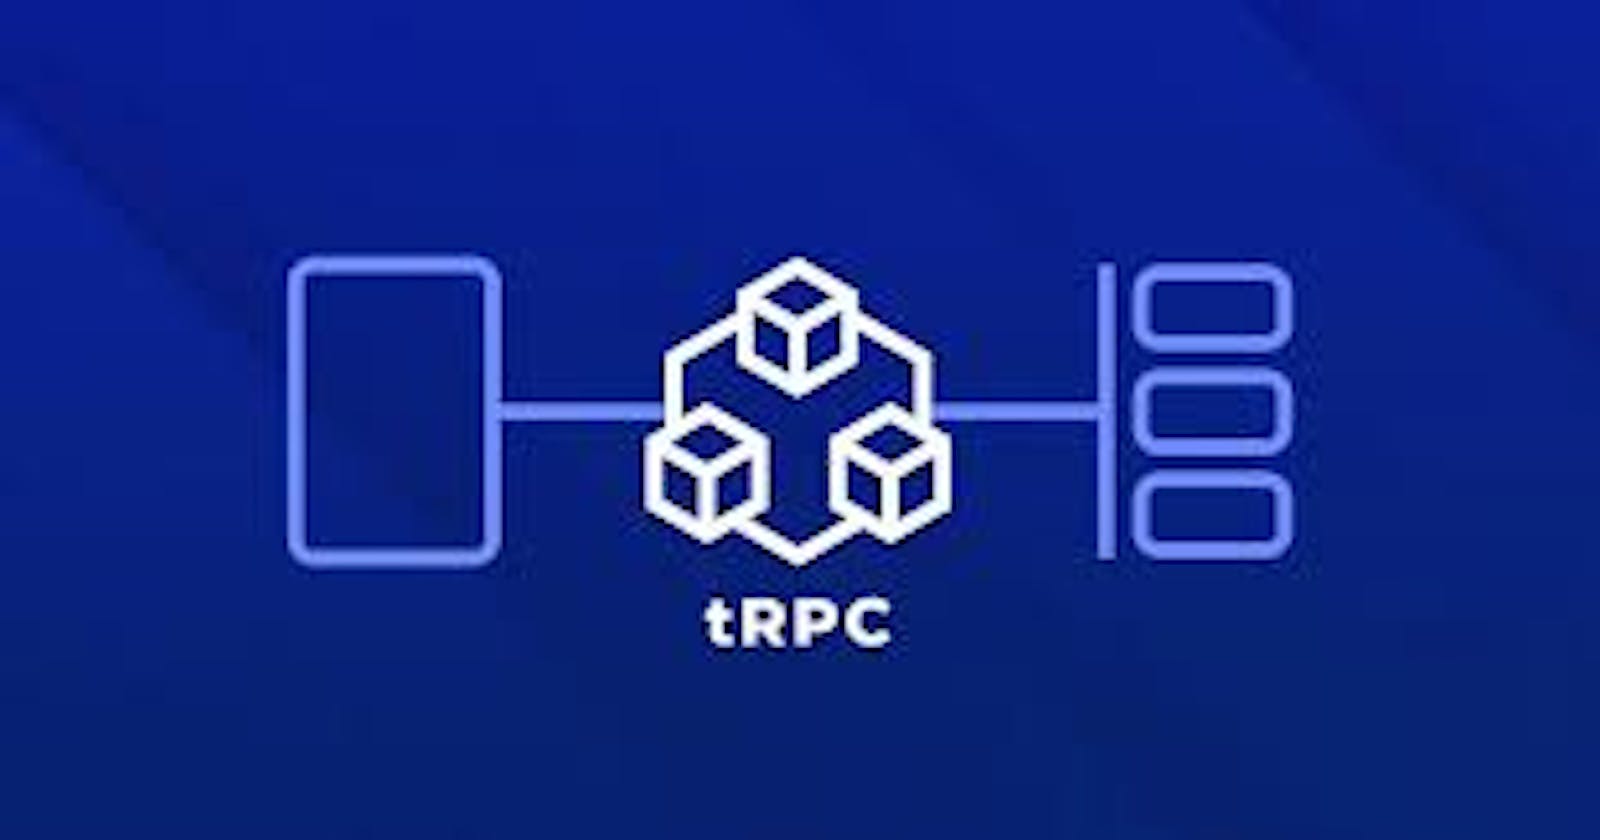 Getting started with tRPC